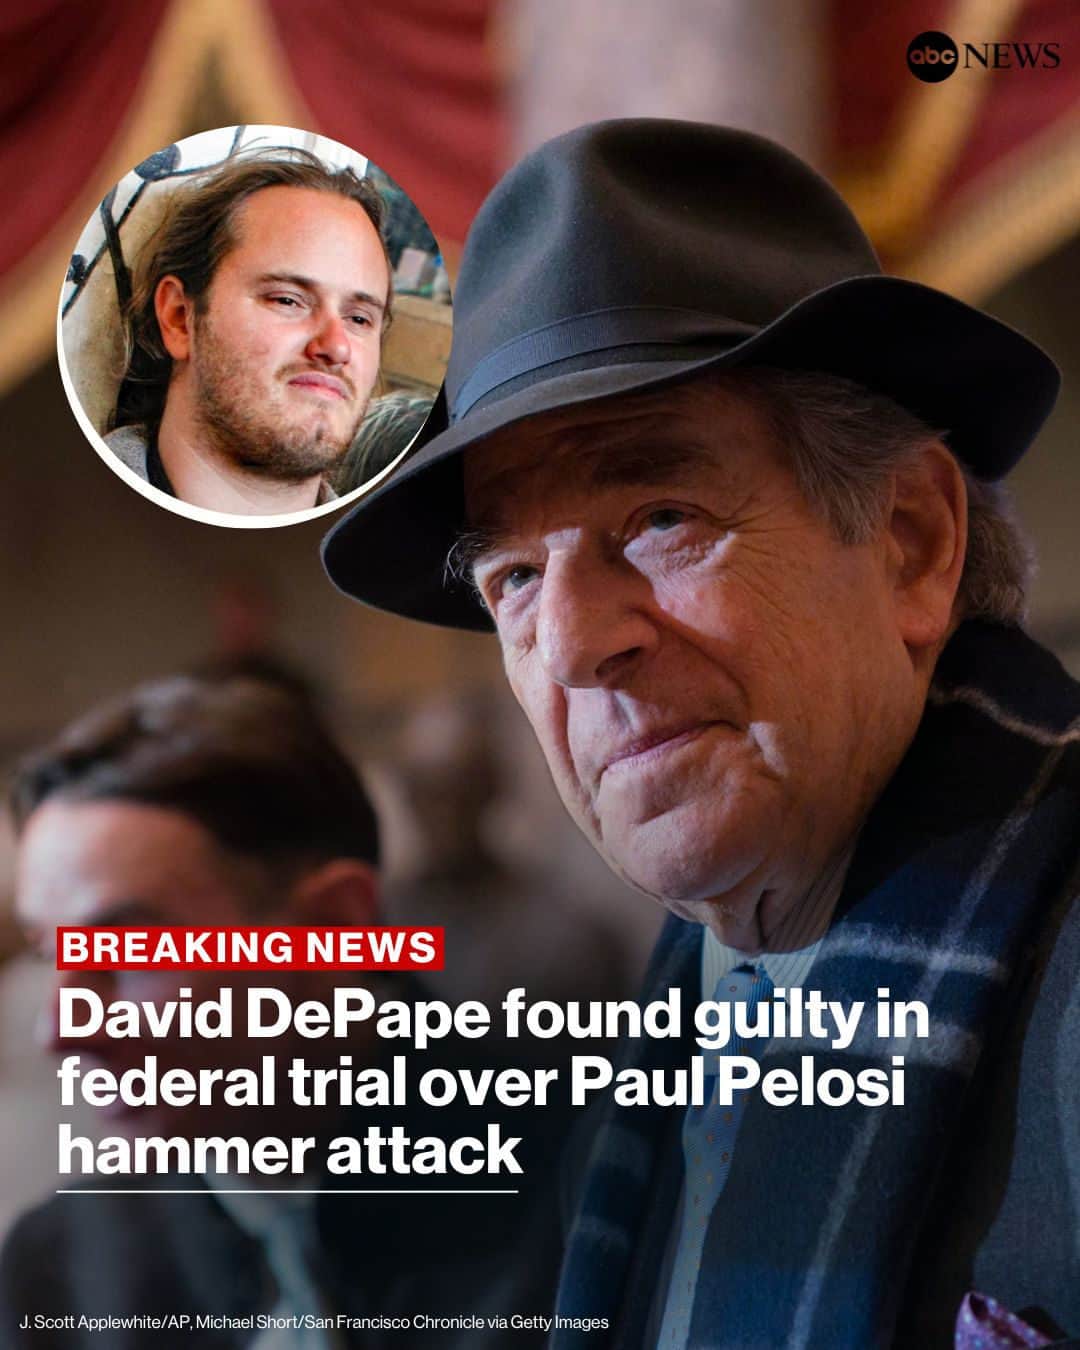 ABC Newsのインスタグラム：「BREAKING: A federal jury has found David DePape, the man accused of attacking former House Speaker Nancy Pelosi's husband with a hammer, guilty on charges of attempted kidnapping and assault. MORE AT LINK IN BIO.」